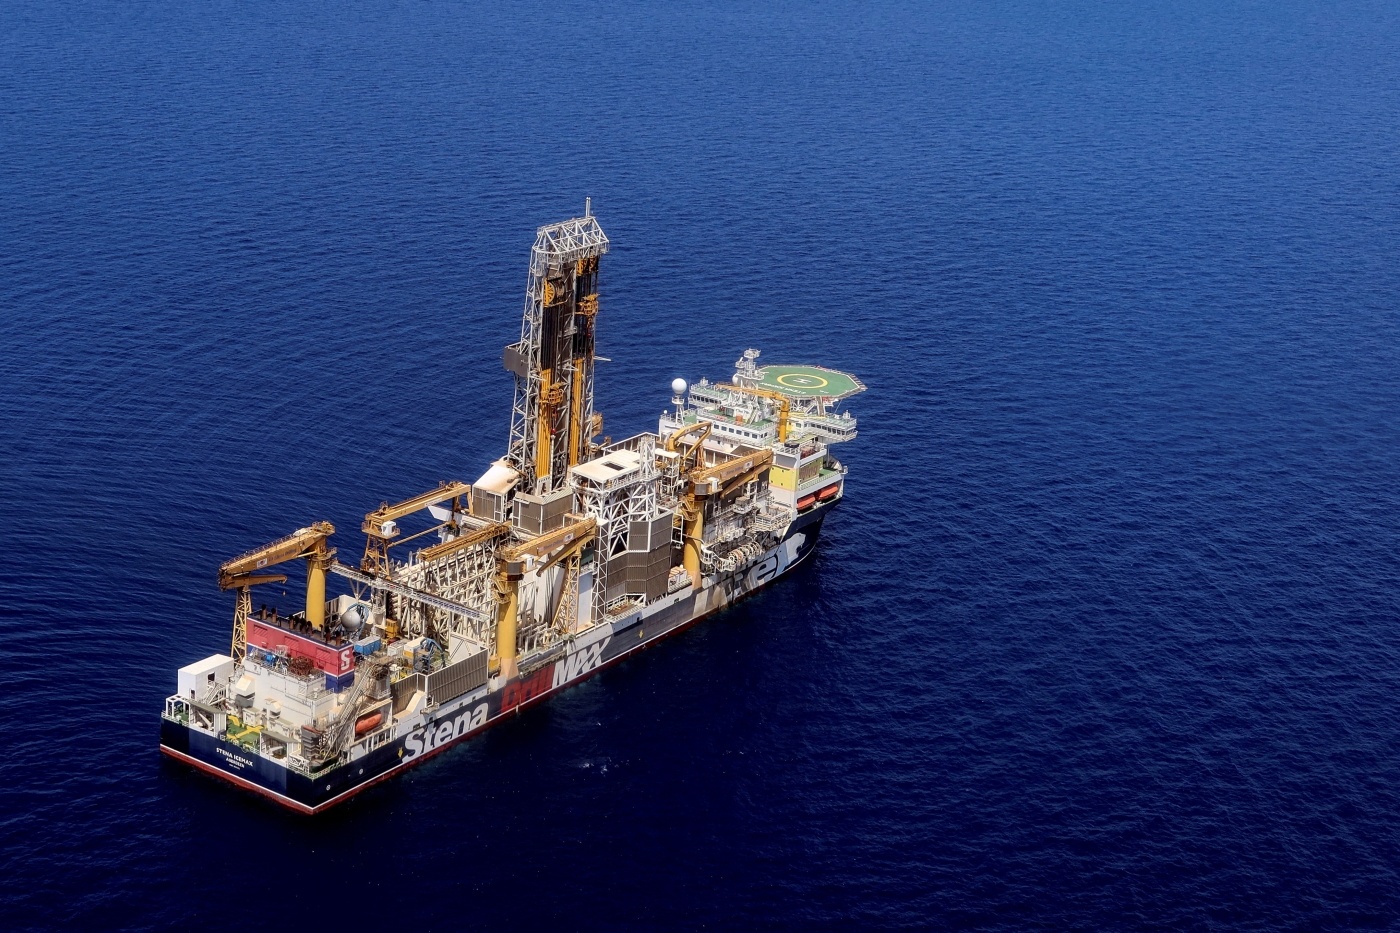 London-based Energean's drill ship begins drilling at the Karish natural gas field offshore Israel in the east Mediterranean 9 May 2022 (AFP)